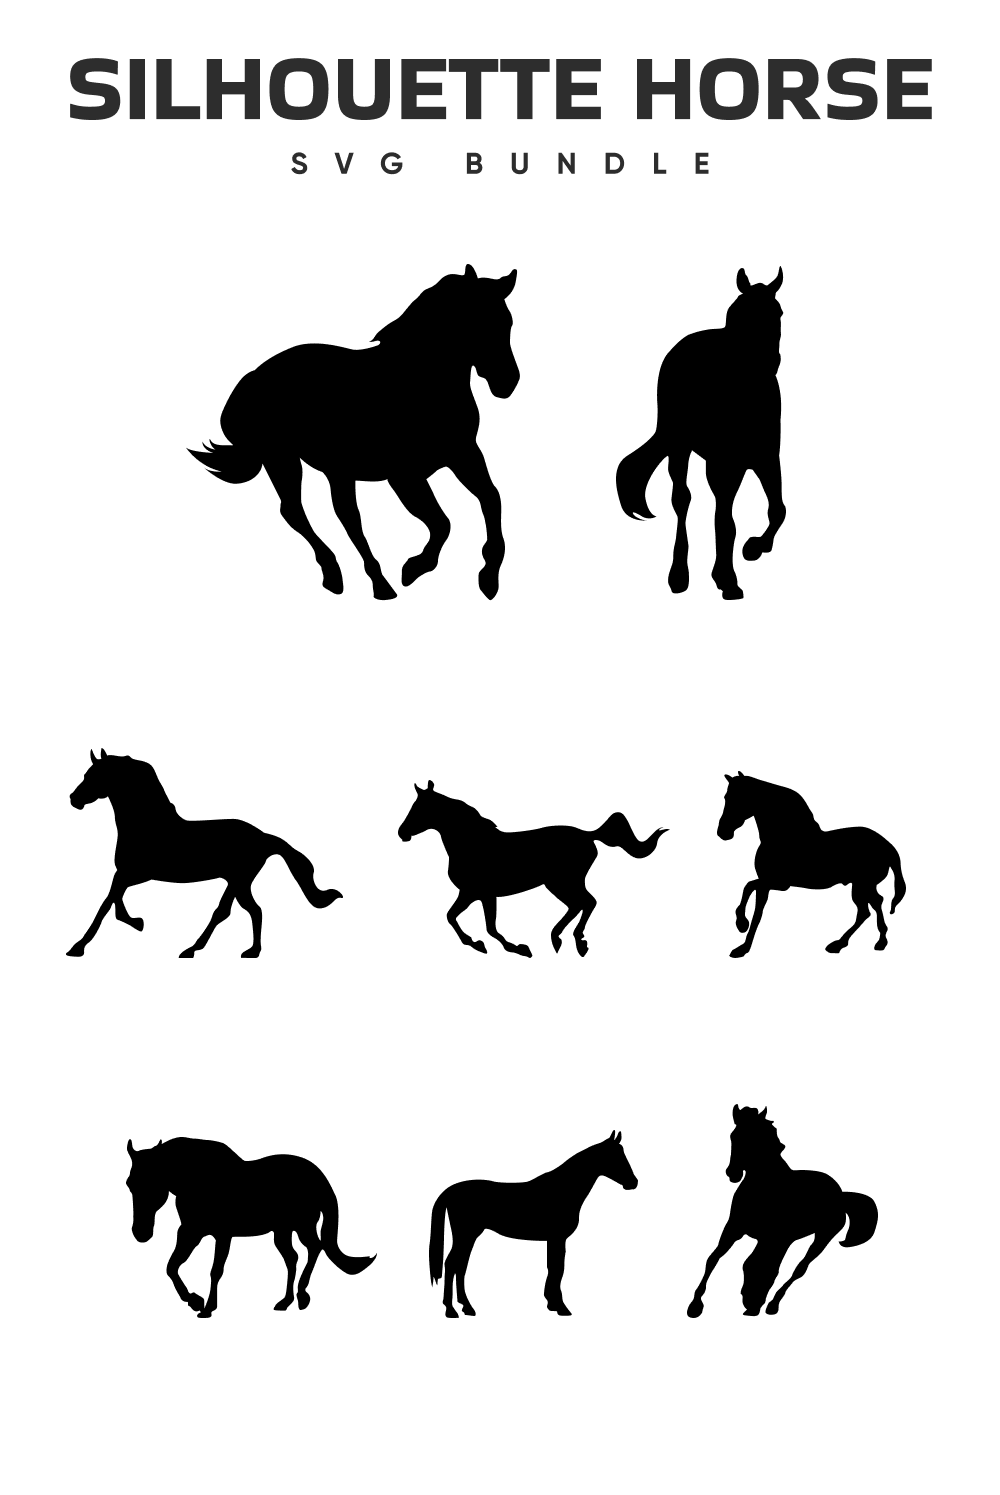 The silhouettes of horses are shown in black and white.